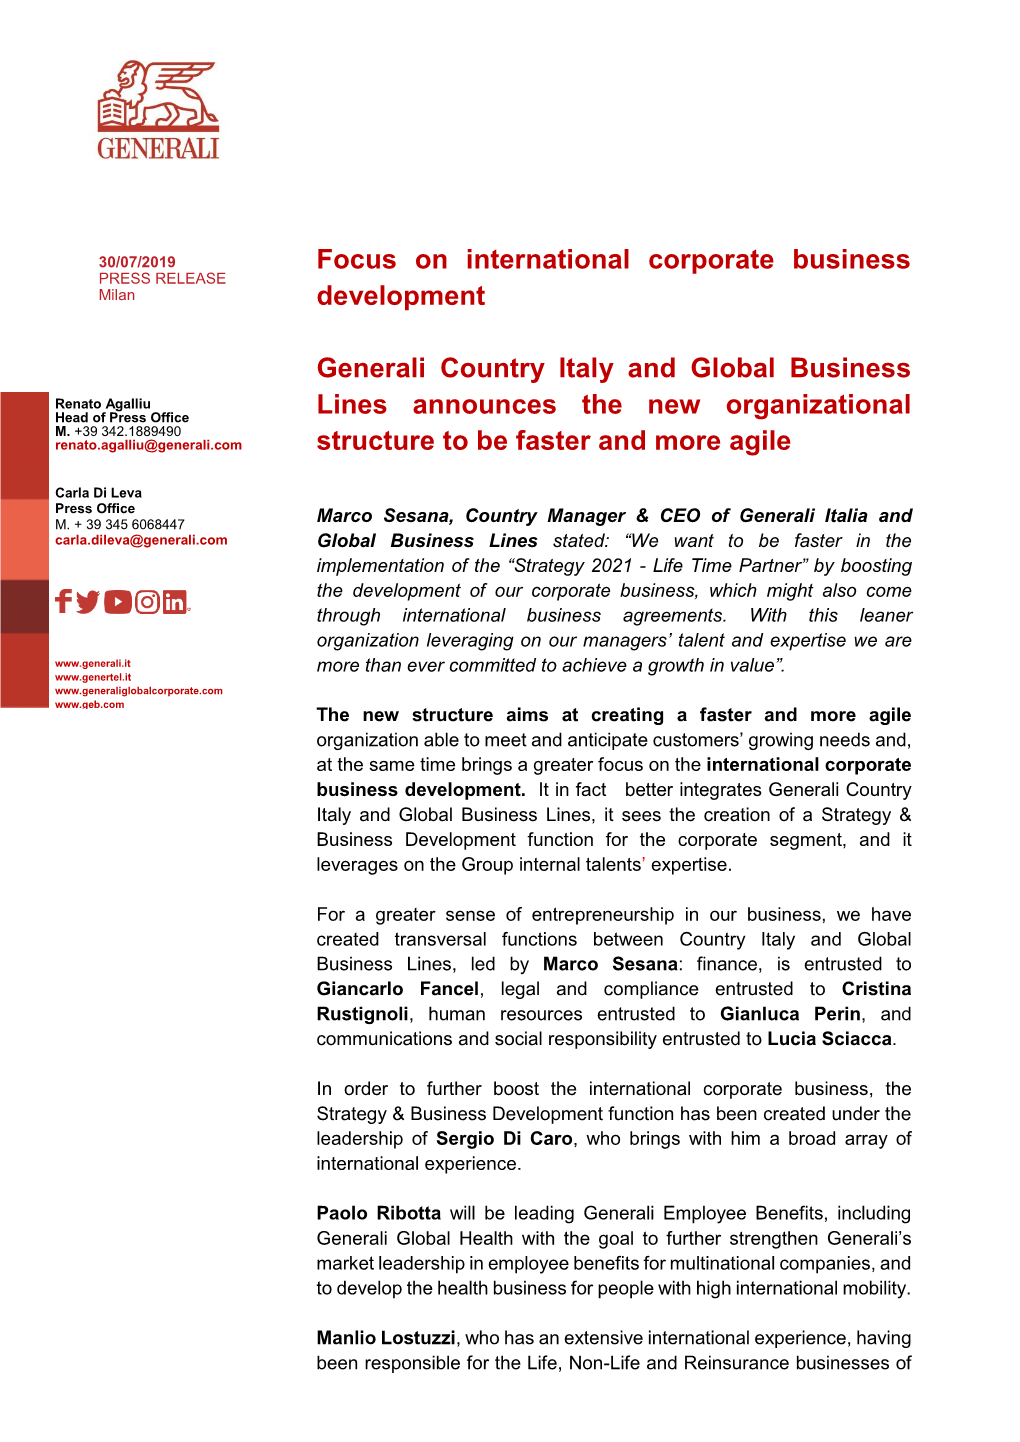 Focus on International Corporate Business Development Generali Country Italy and Global Business Lines Announces the New Organiz